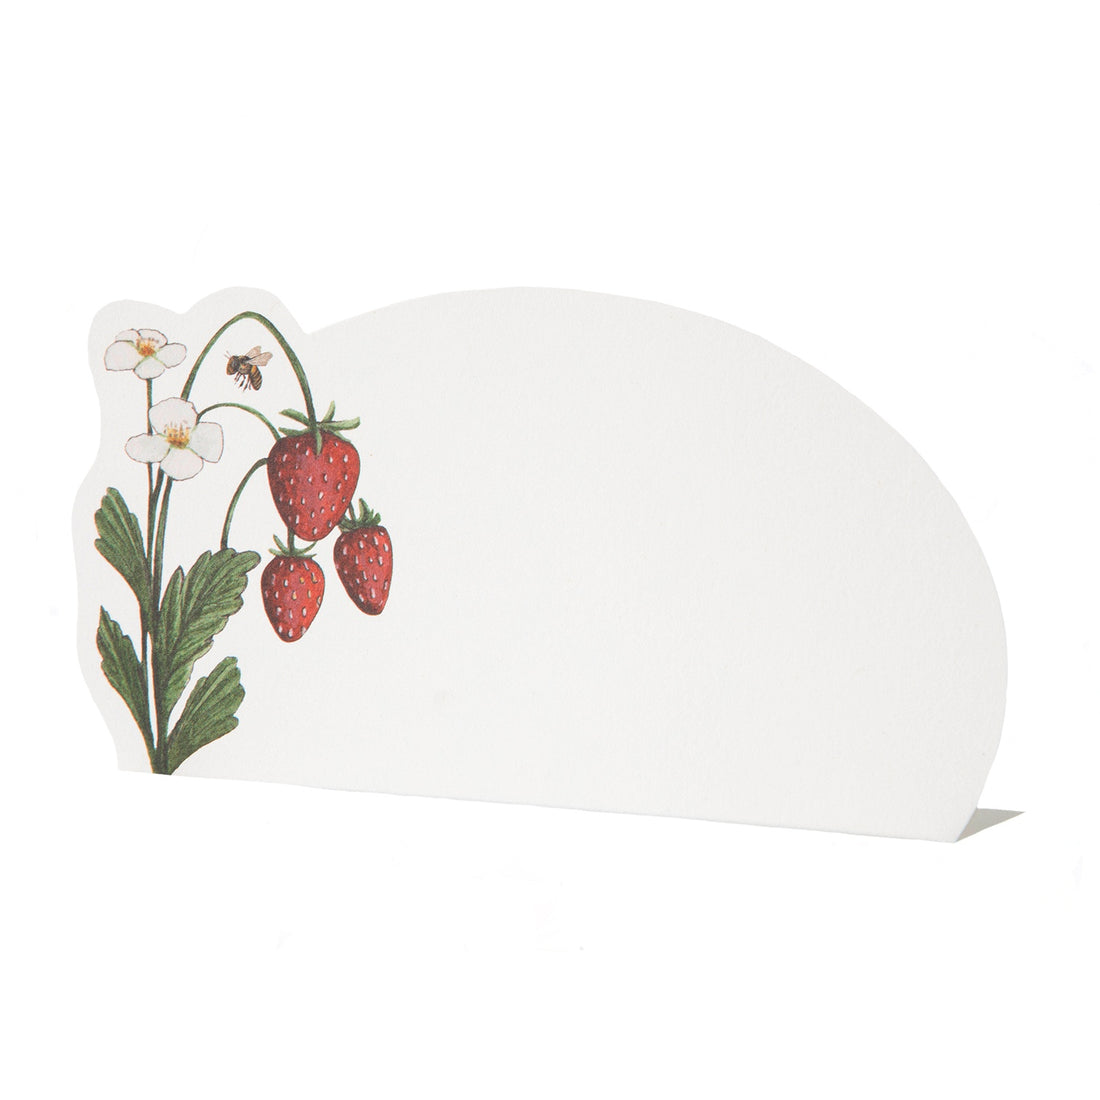 A white, die-cut freestanding place card with a rounded oval shape, featuring a strawberry plant with three red berries, two white blooms and a bee adorning the left side of the card.